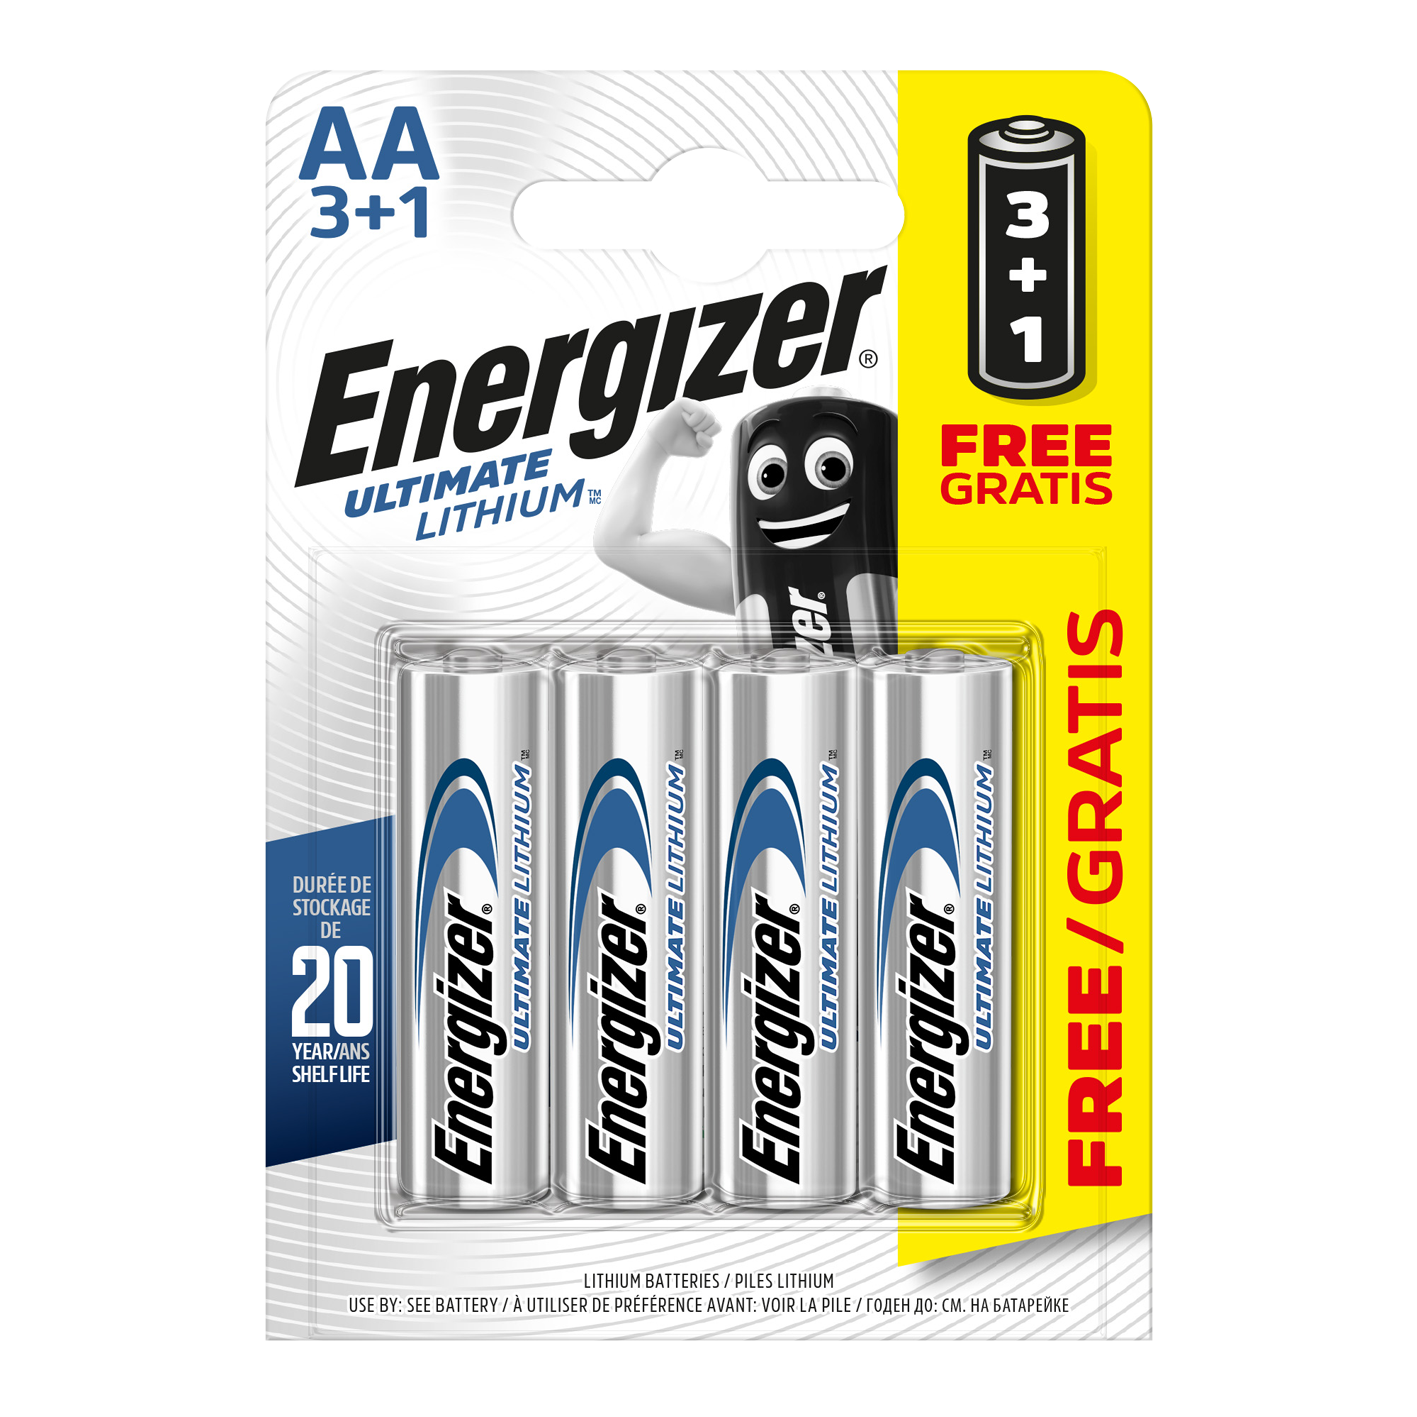 Energizer Pilas Ultimate Lithium - AA, AAA & 9V Spanish